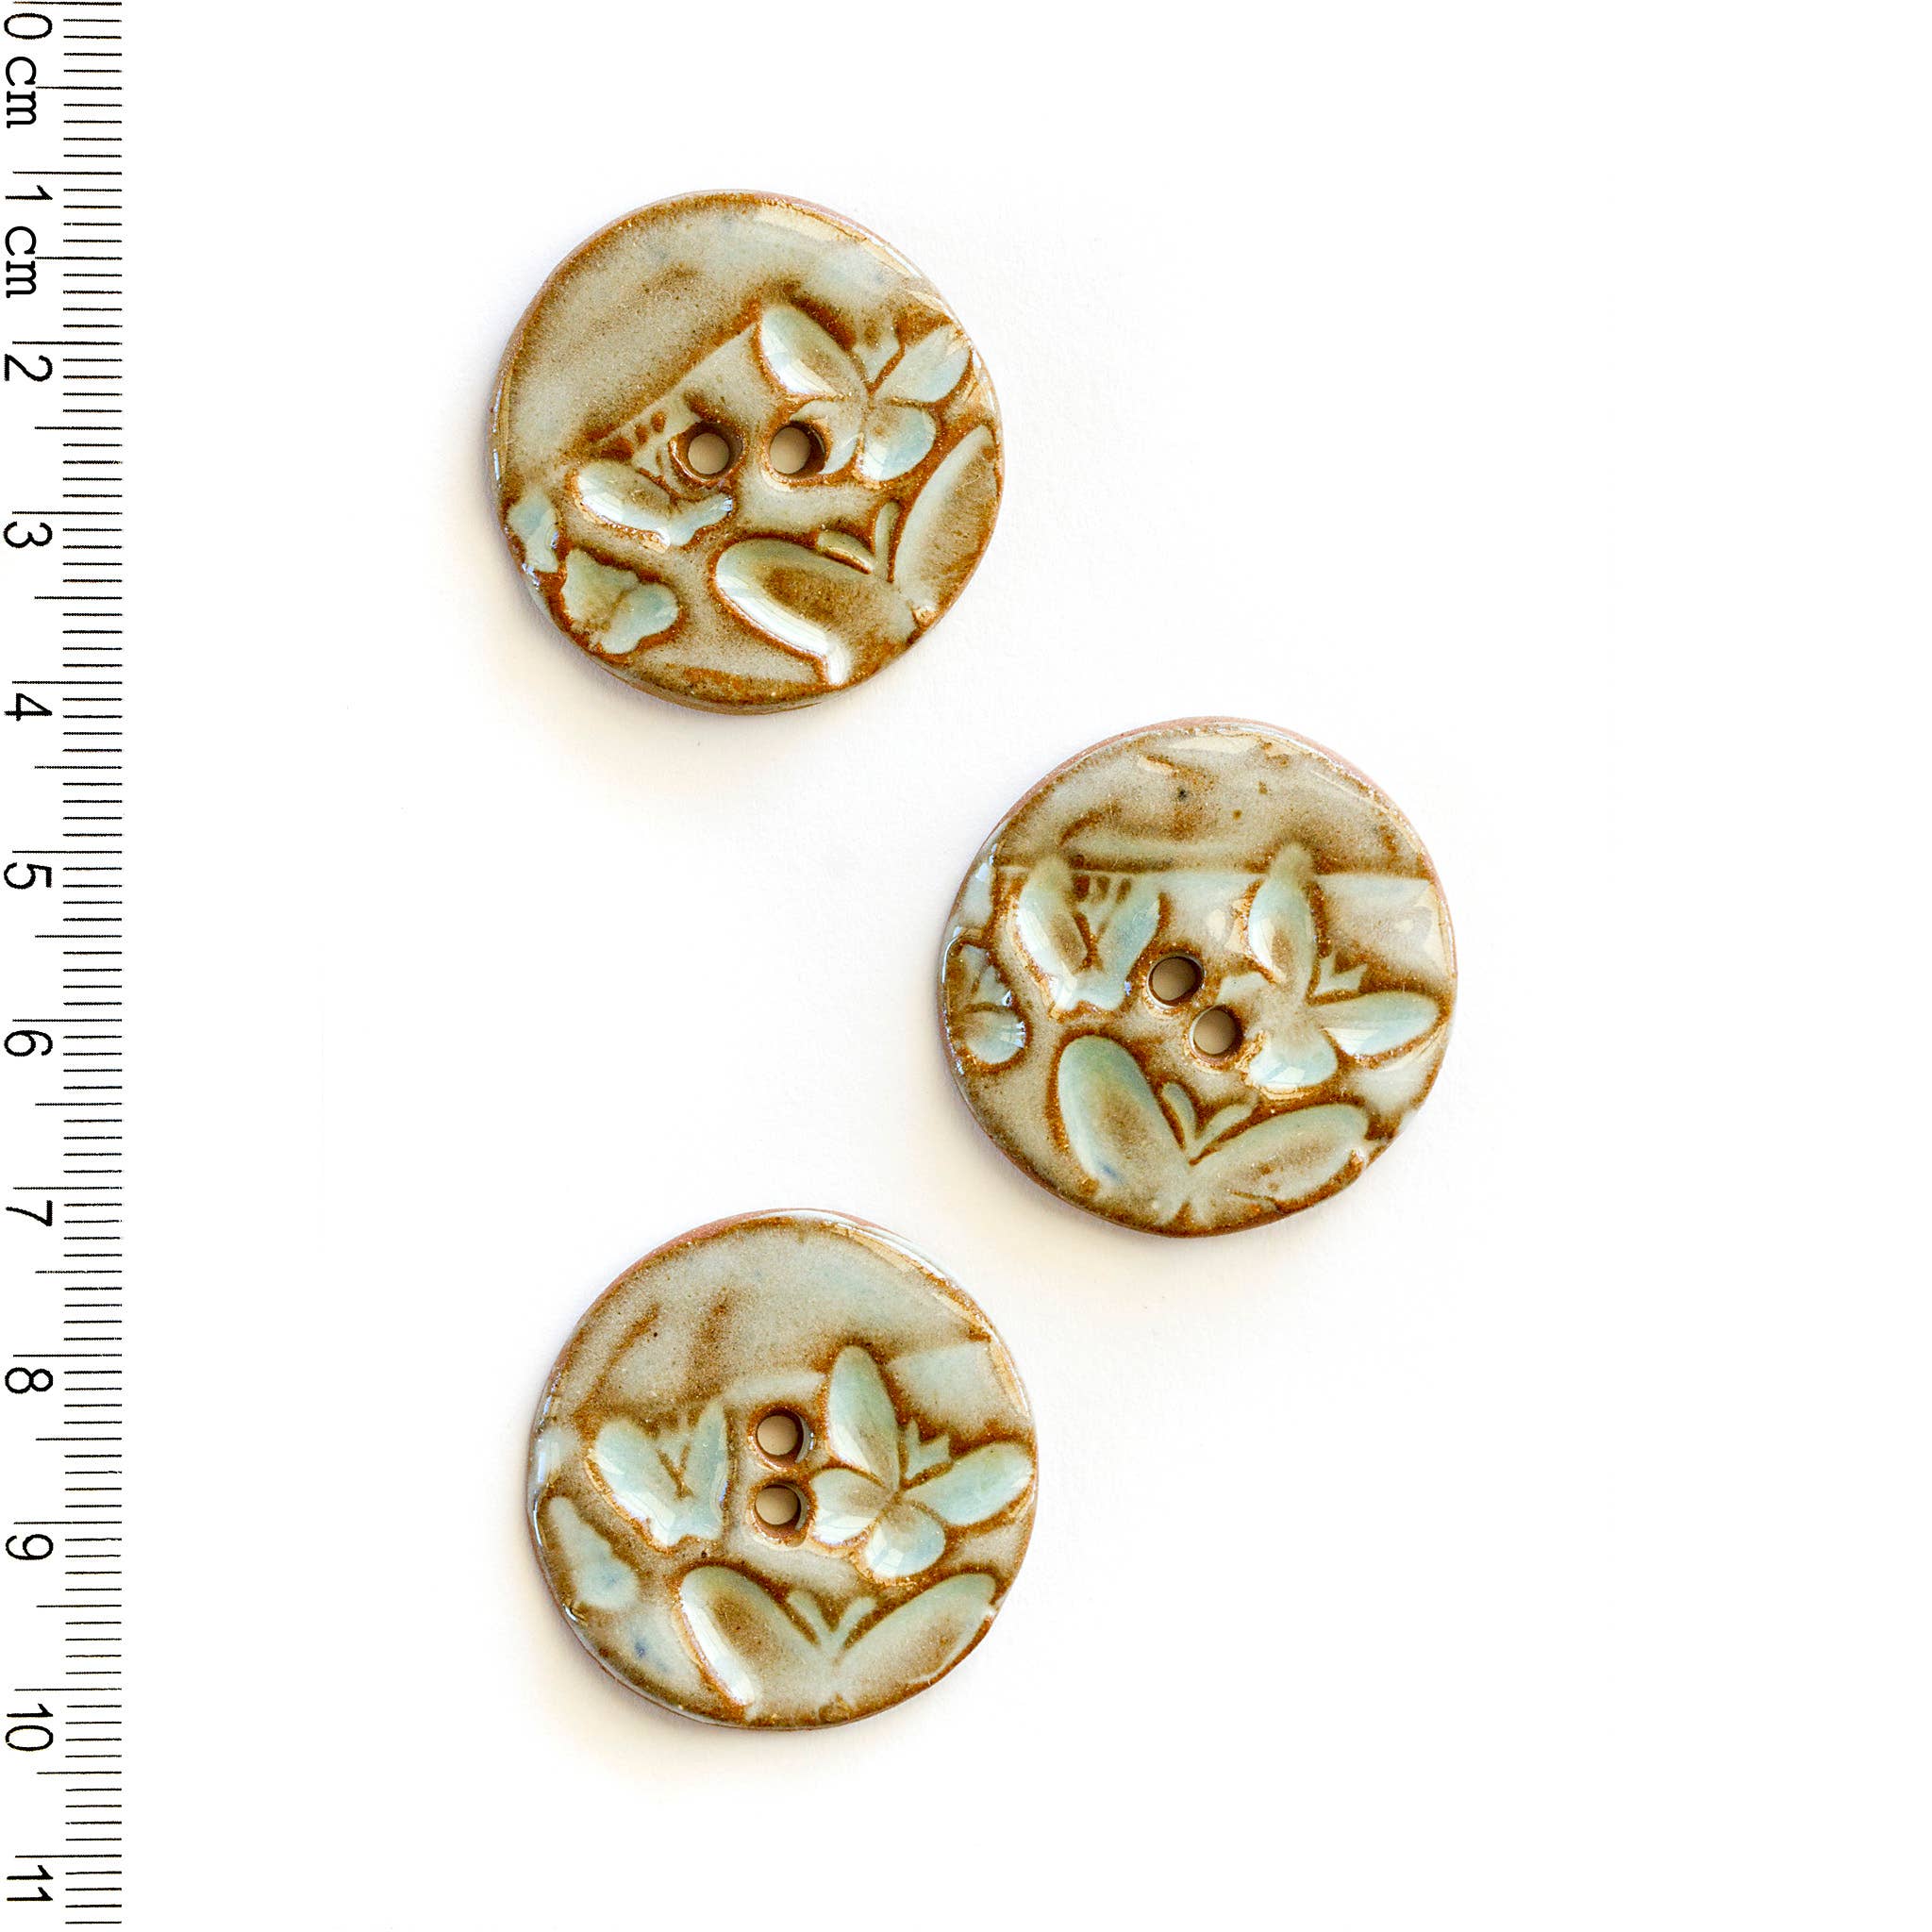 Incomparable Buttons - L502 Butterfly Relief Buttons